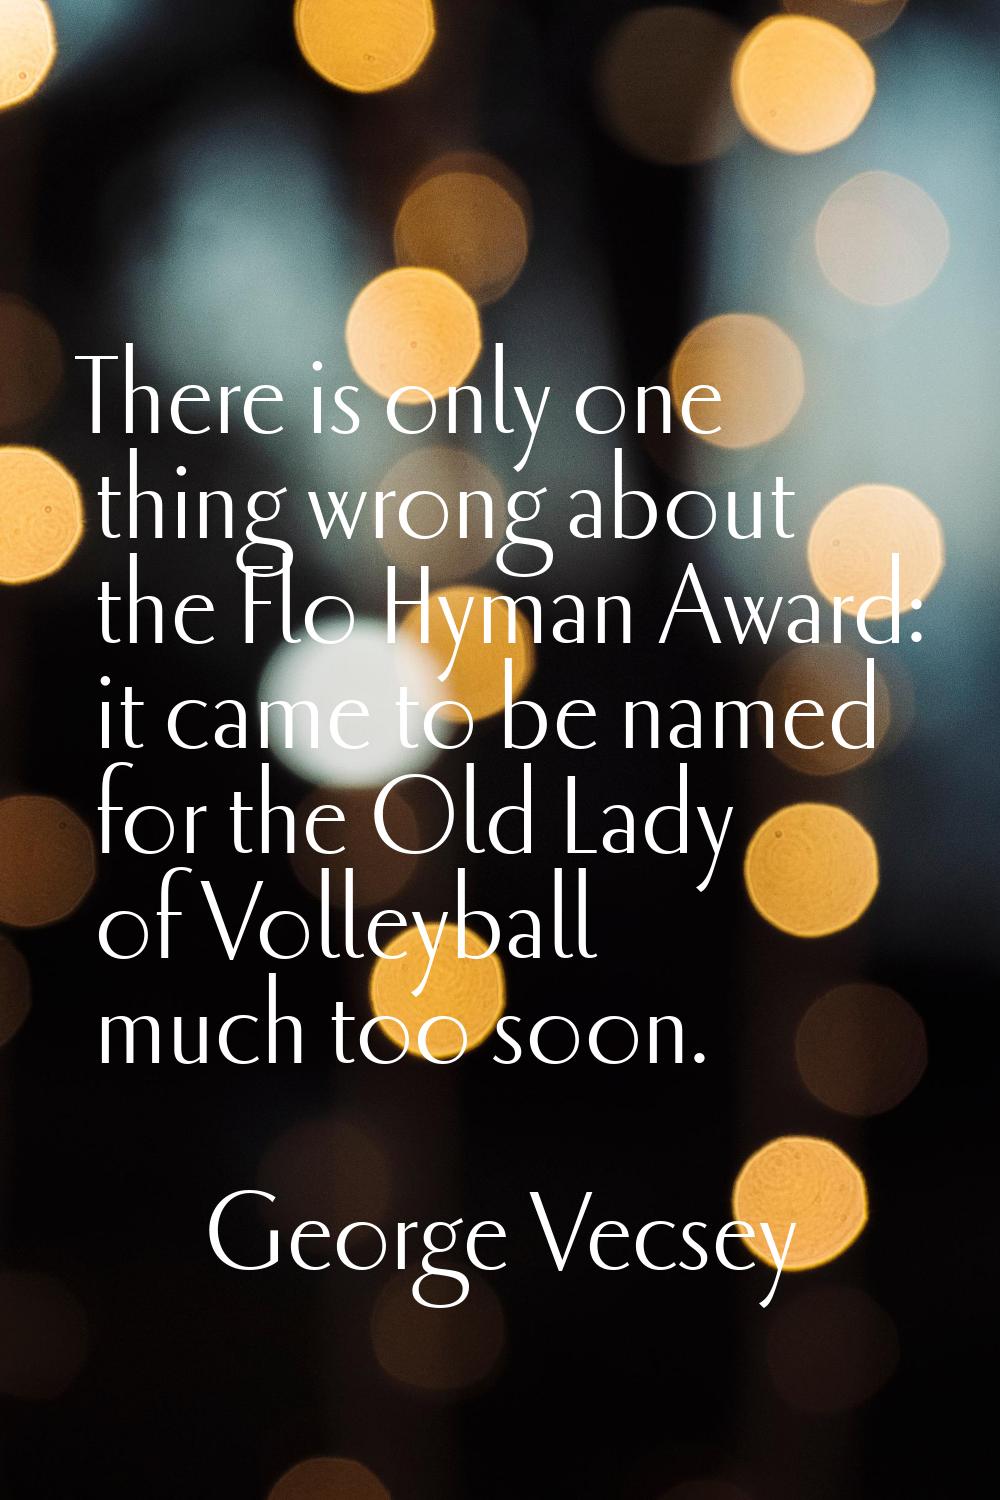 There is only one thing wrong about the Flo Hyman Award: it came to be named for the Old Lady of Vo